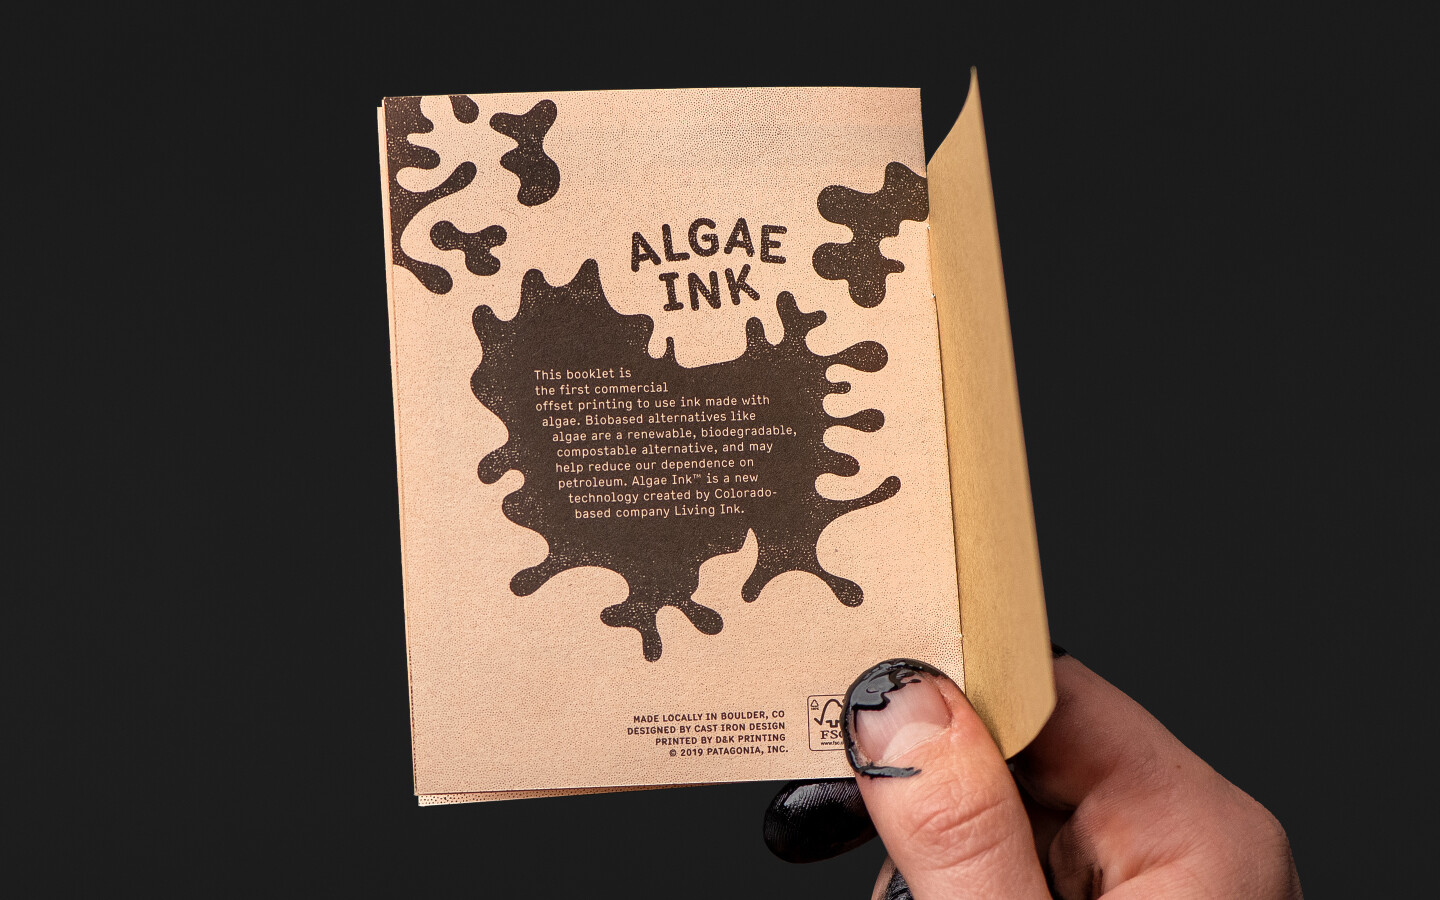 A hand holding a small booklet printed with algae ink